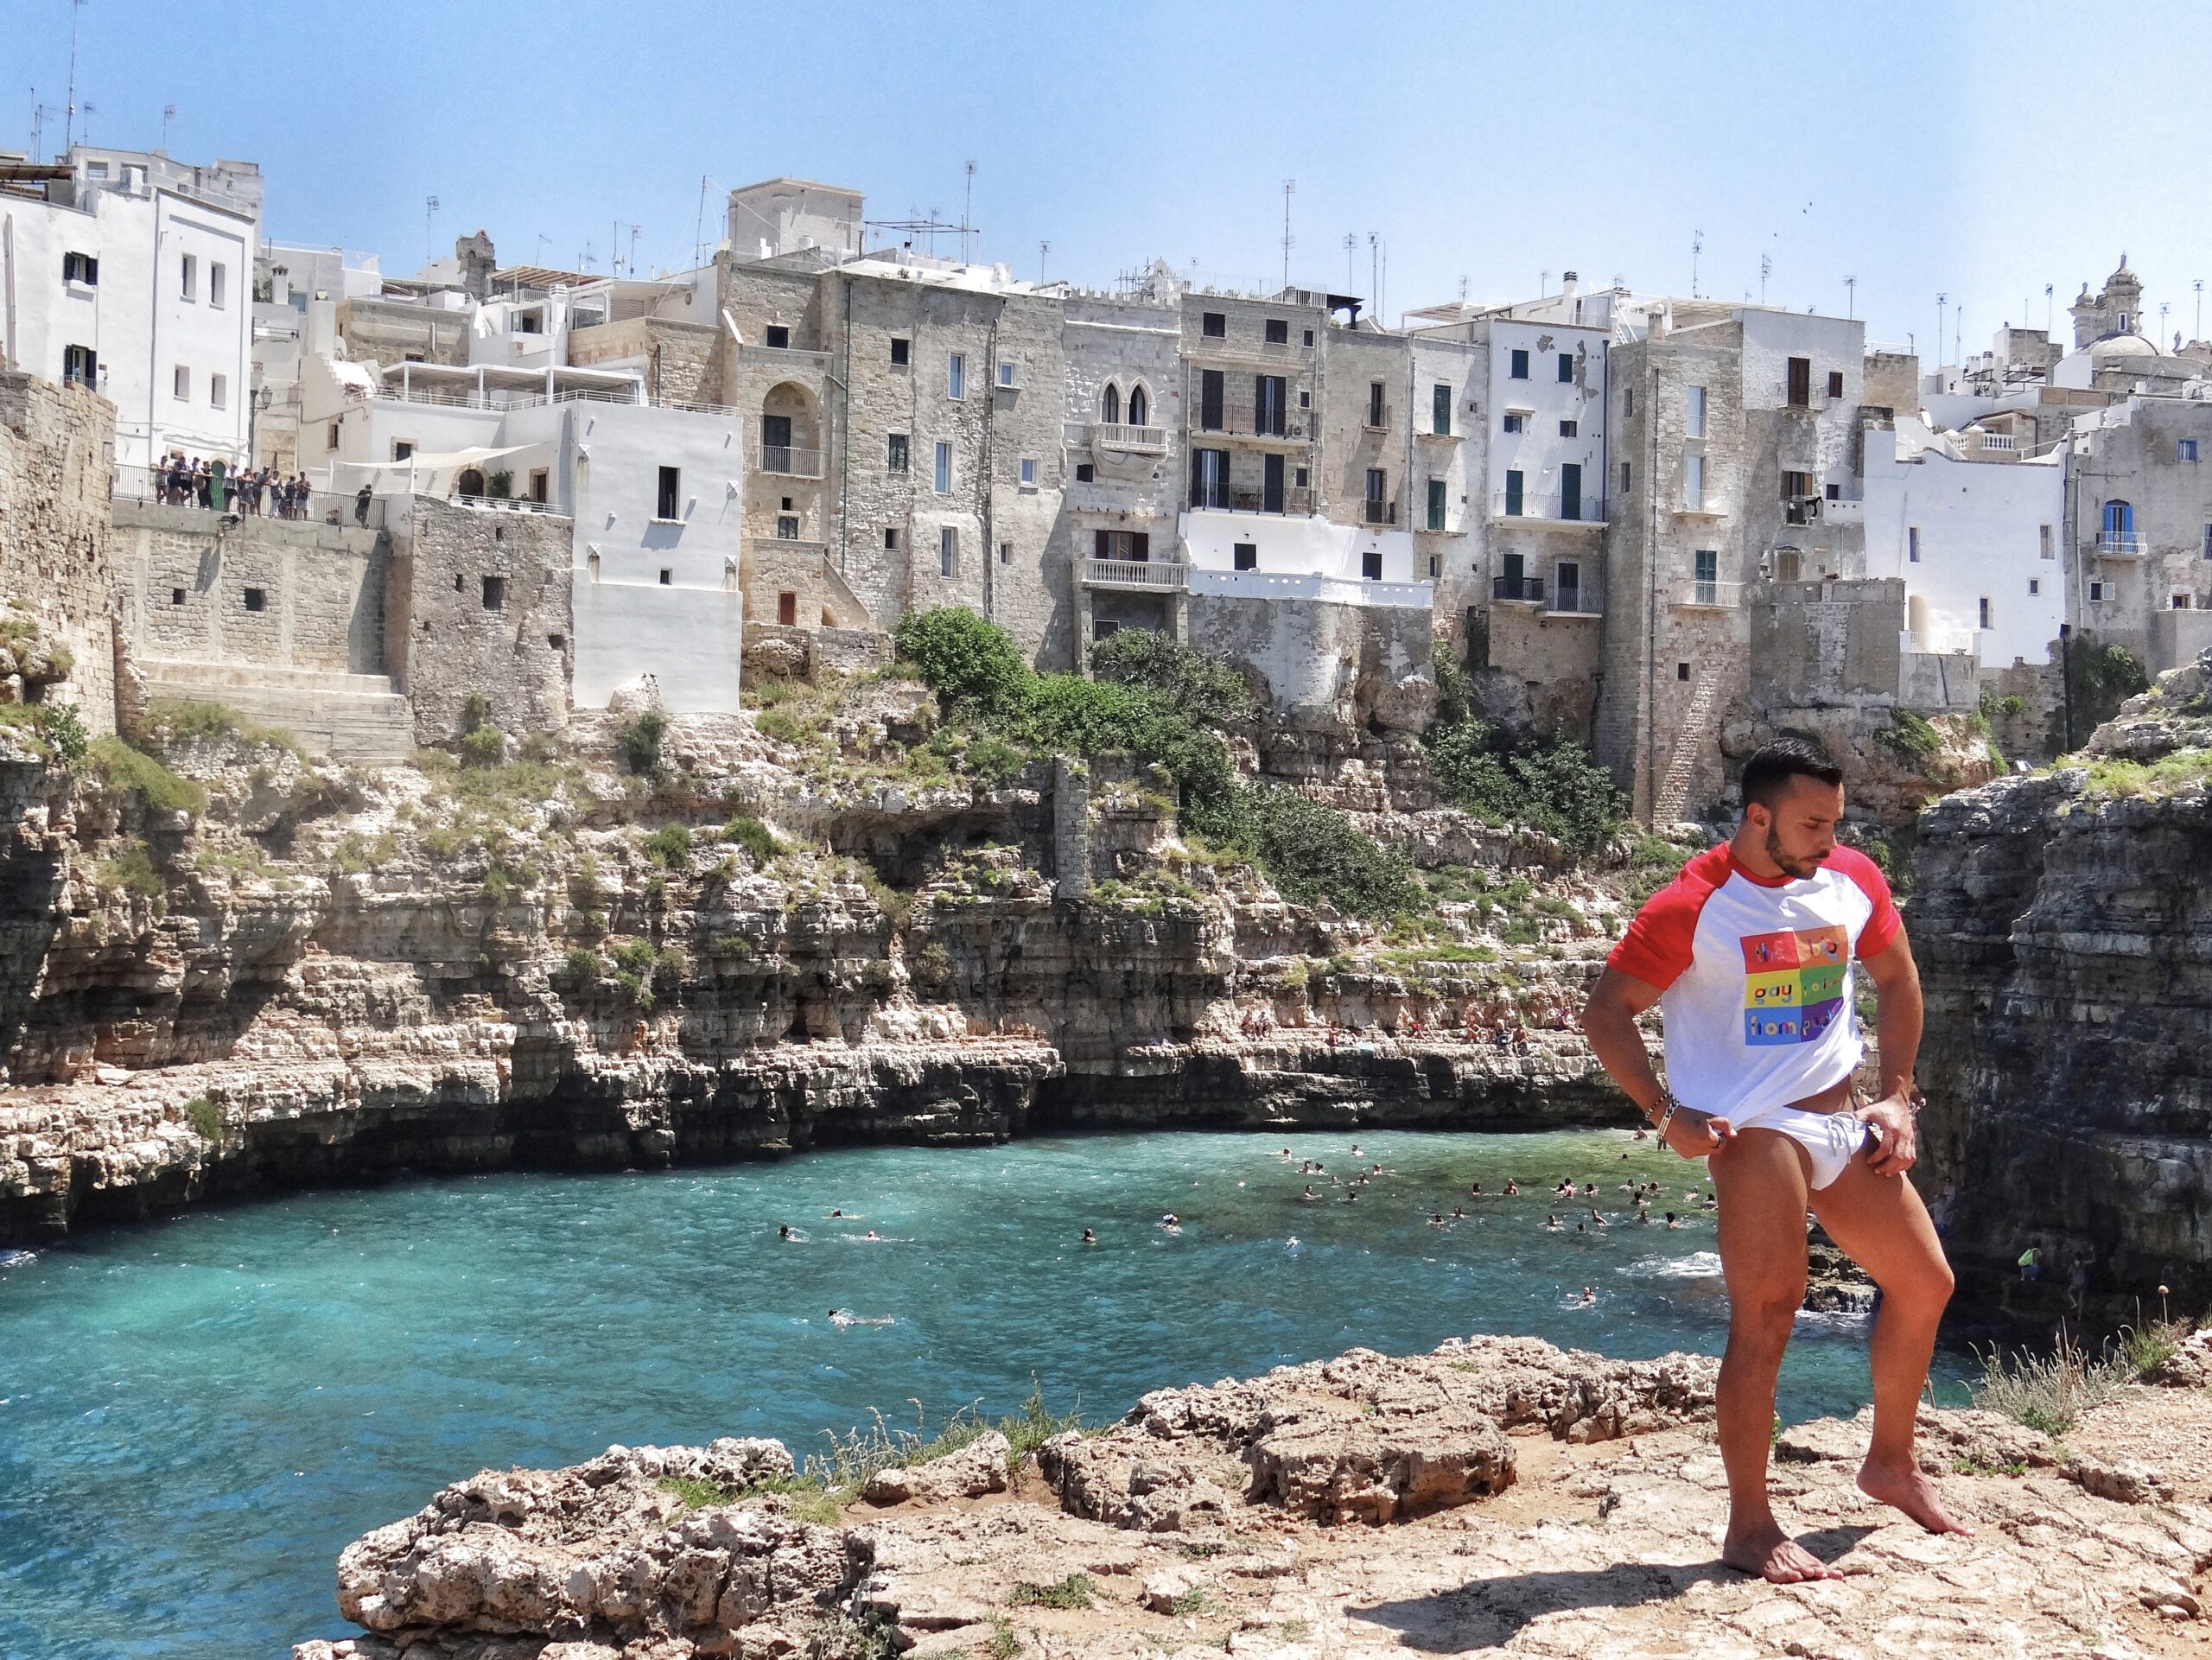 Polignano a Mare has one of Puglia’s most iconic views. Puglia is Italy’s top gay summer destination for LGBT travel with a variety of gay and nudist beaches, gay bars and clubs and a chilled gay scene. Photo by the Puglia Guys for The Big Gay Podcast from Puglia.